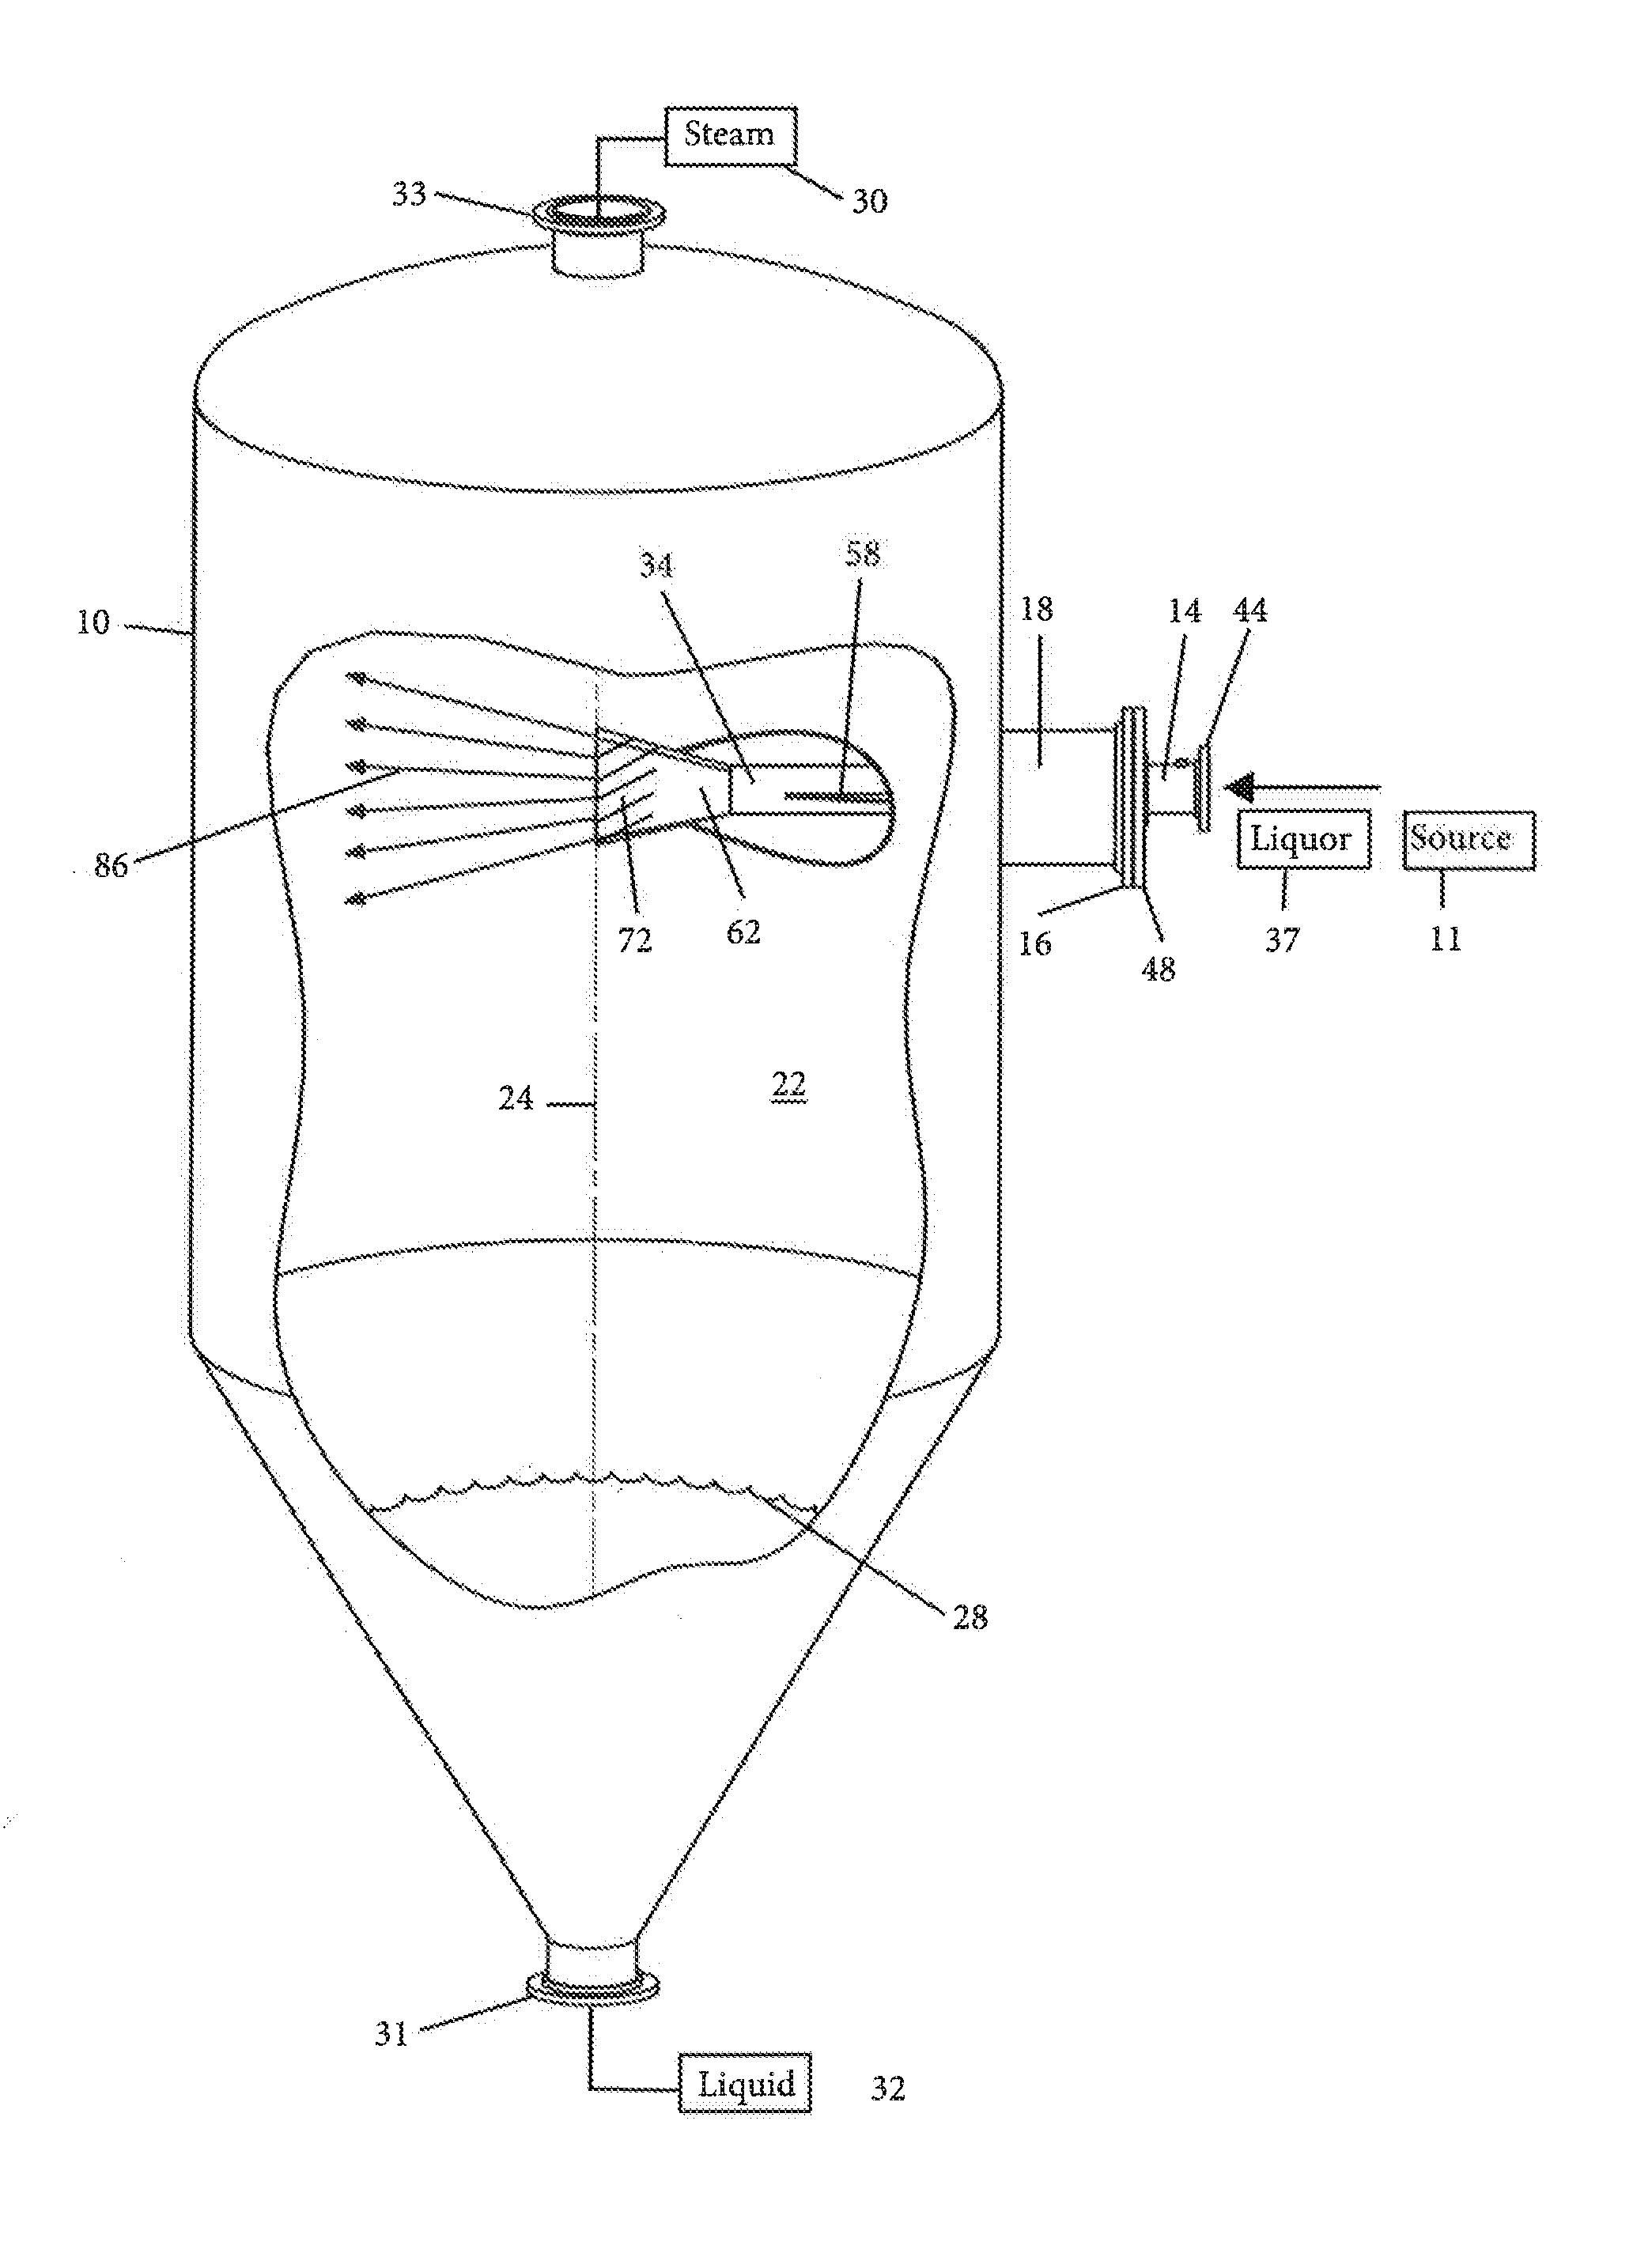 Flash tank with flared inlet insert and method for introducing flow into a flash tank